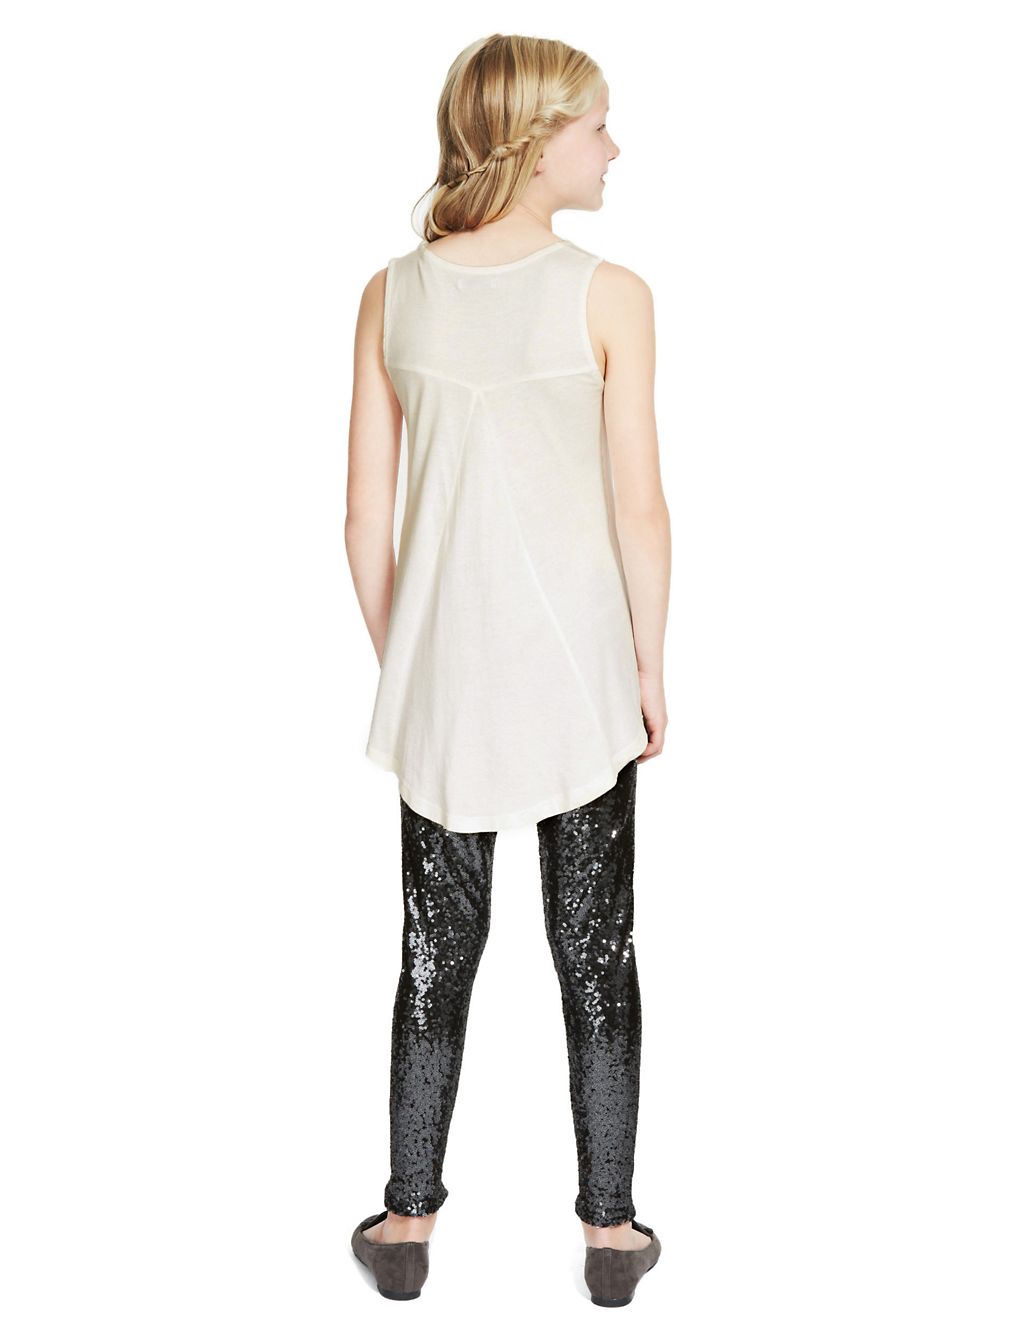 Studded Heart Vest Top & Leggings Outfit 4 of 6